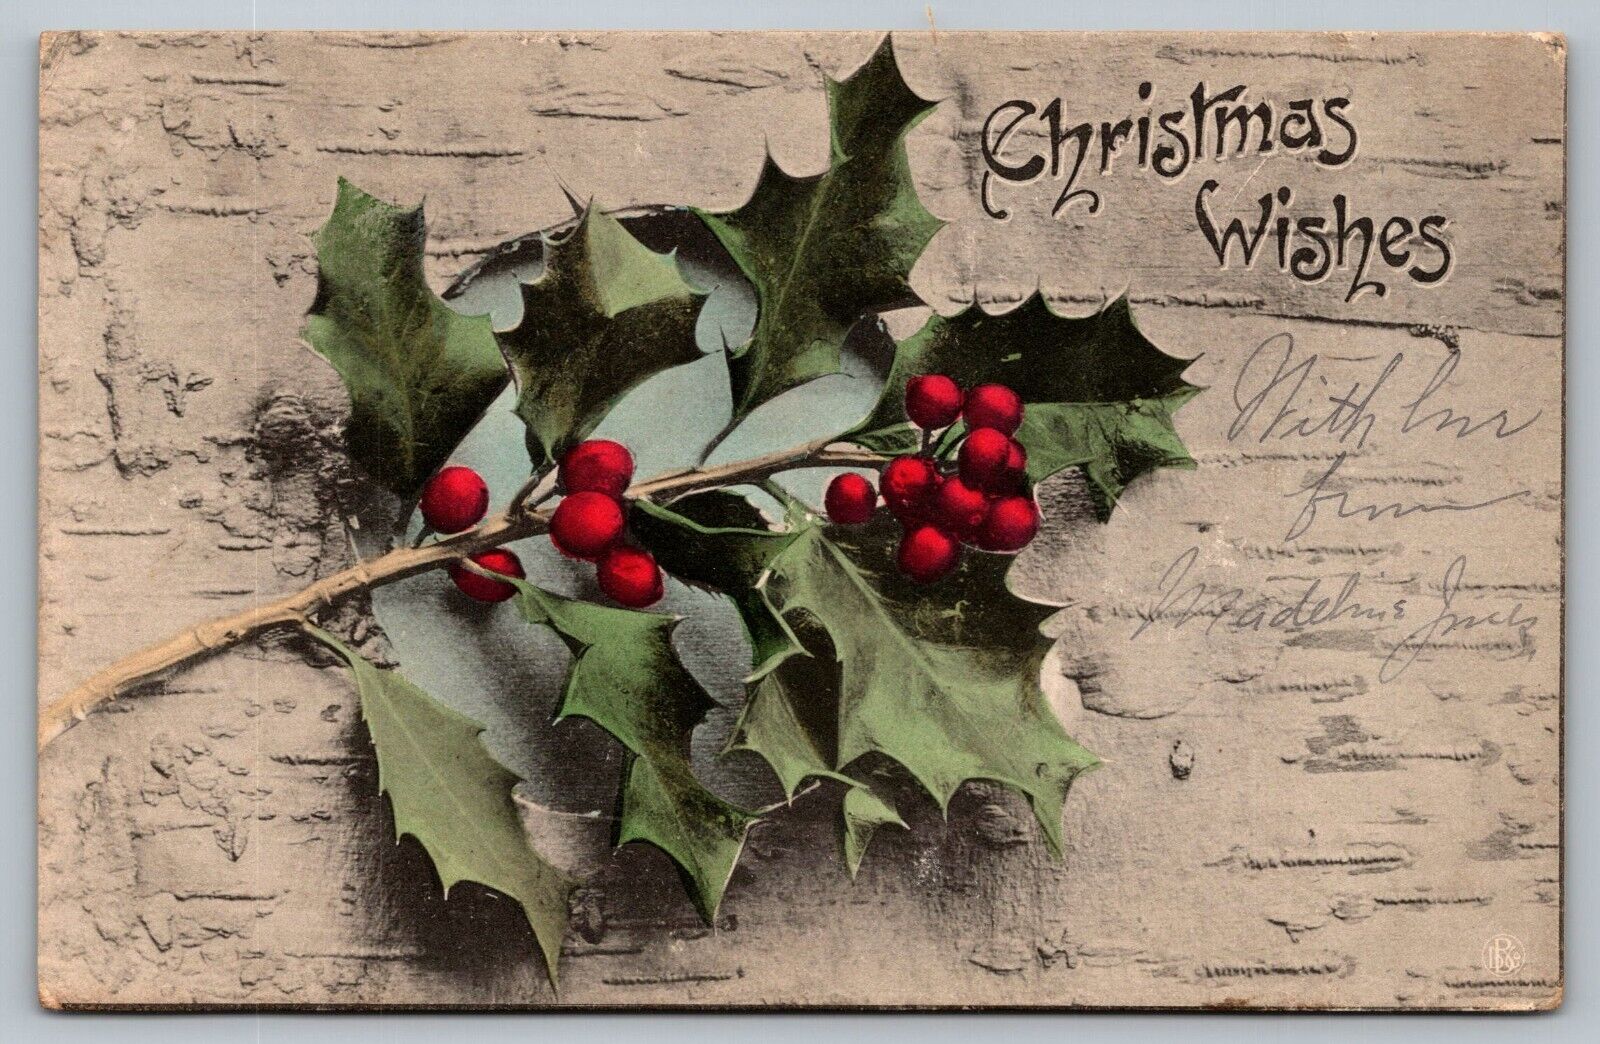 Postcard D&C Christmas Wishes Green Holly and Berries Berlin c1905 XMas